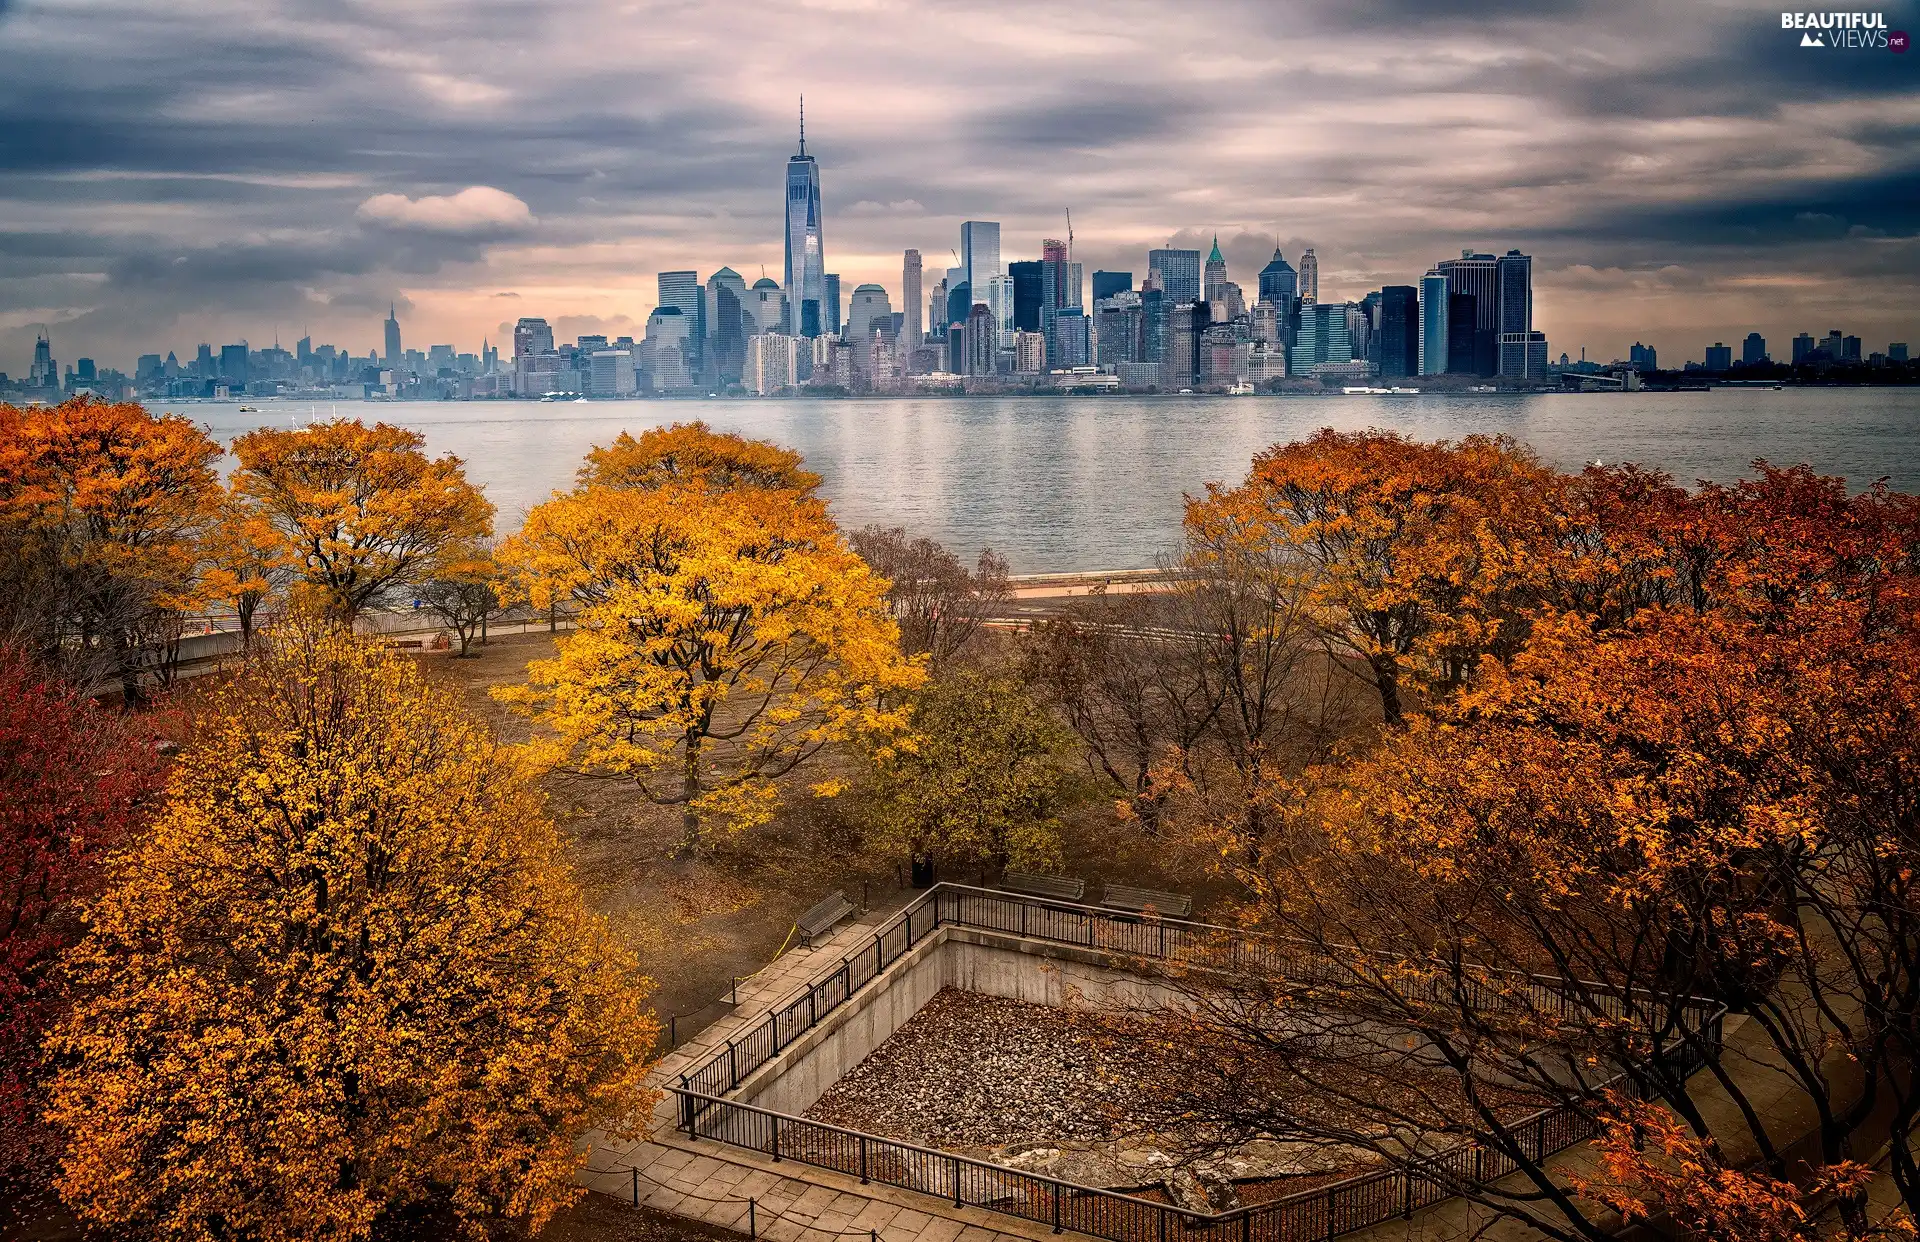 State of New Jersey, The United States, Ellis Island, Hudson River, trees, viewes, Downtown Manhattan, autumn, State of New York